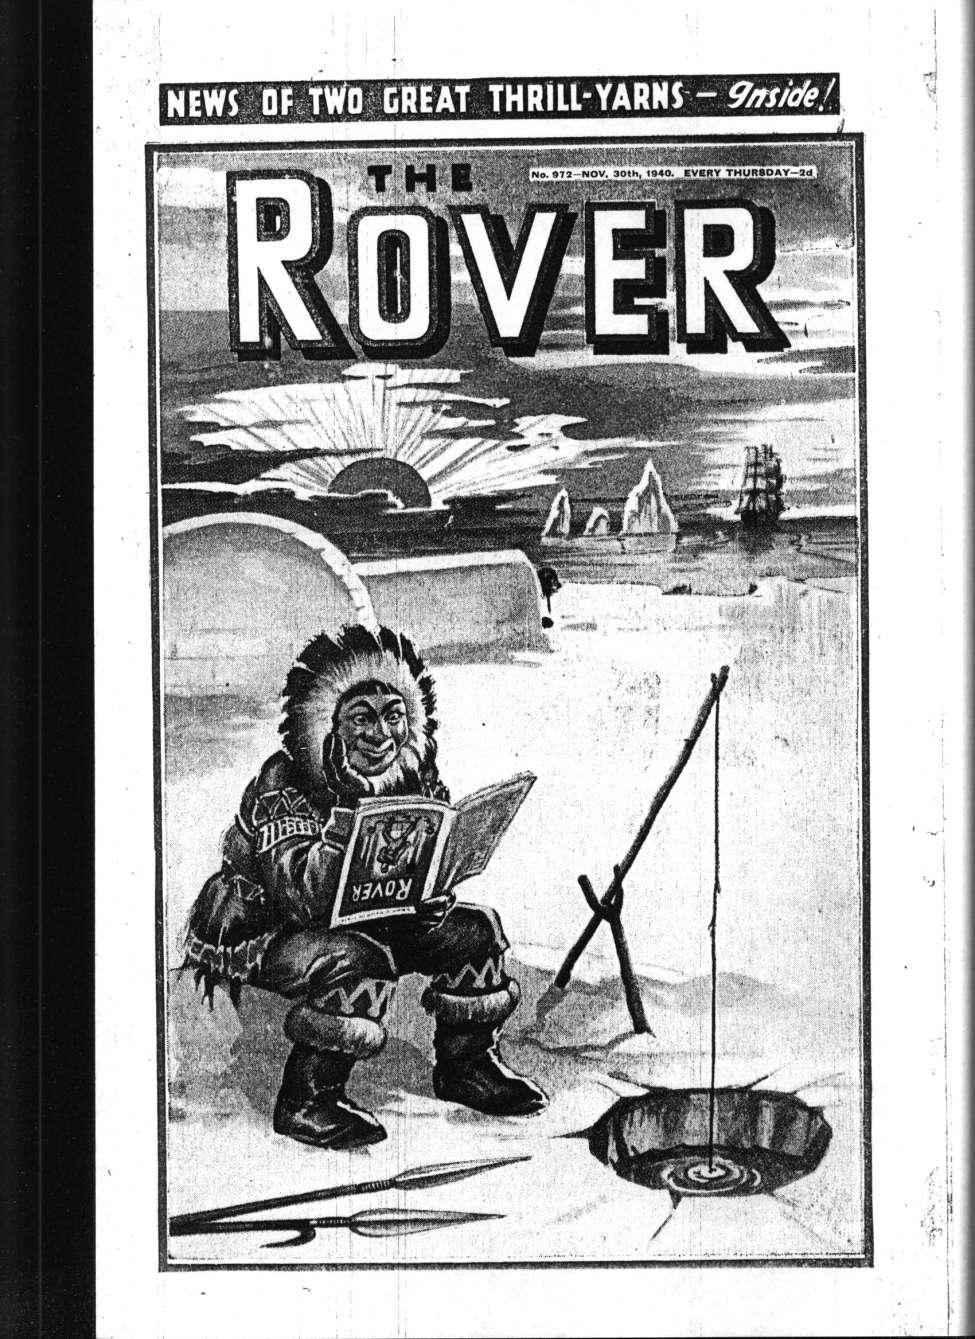 Book Cover For The Rover 972